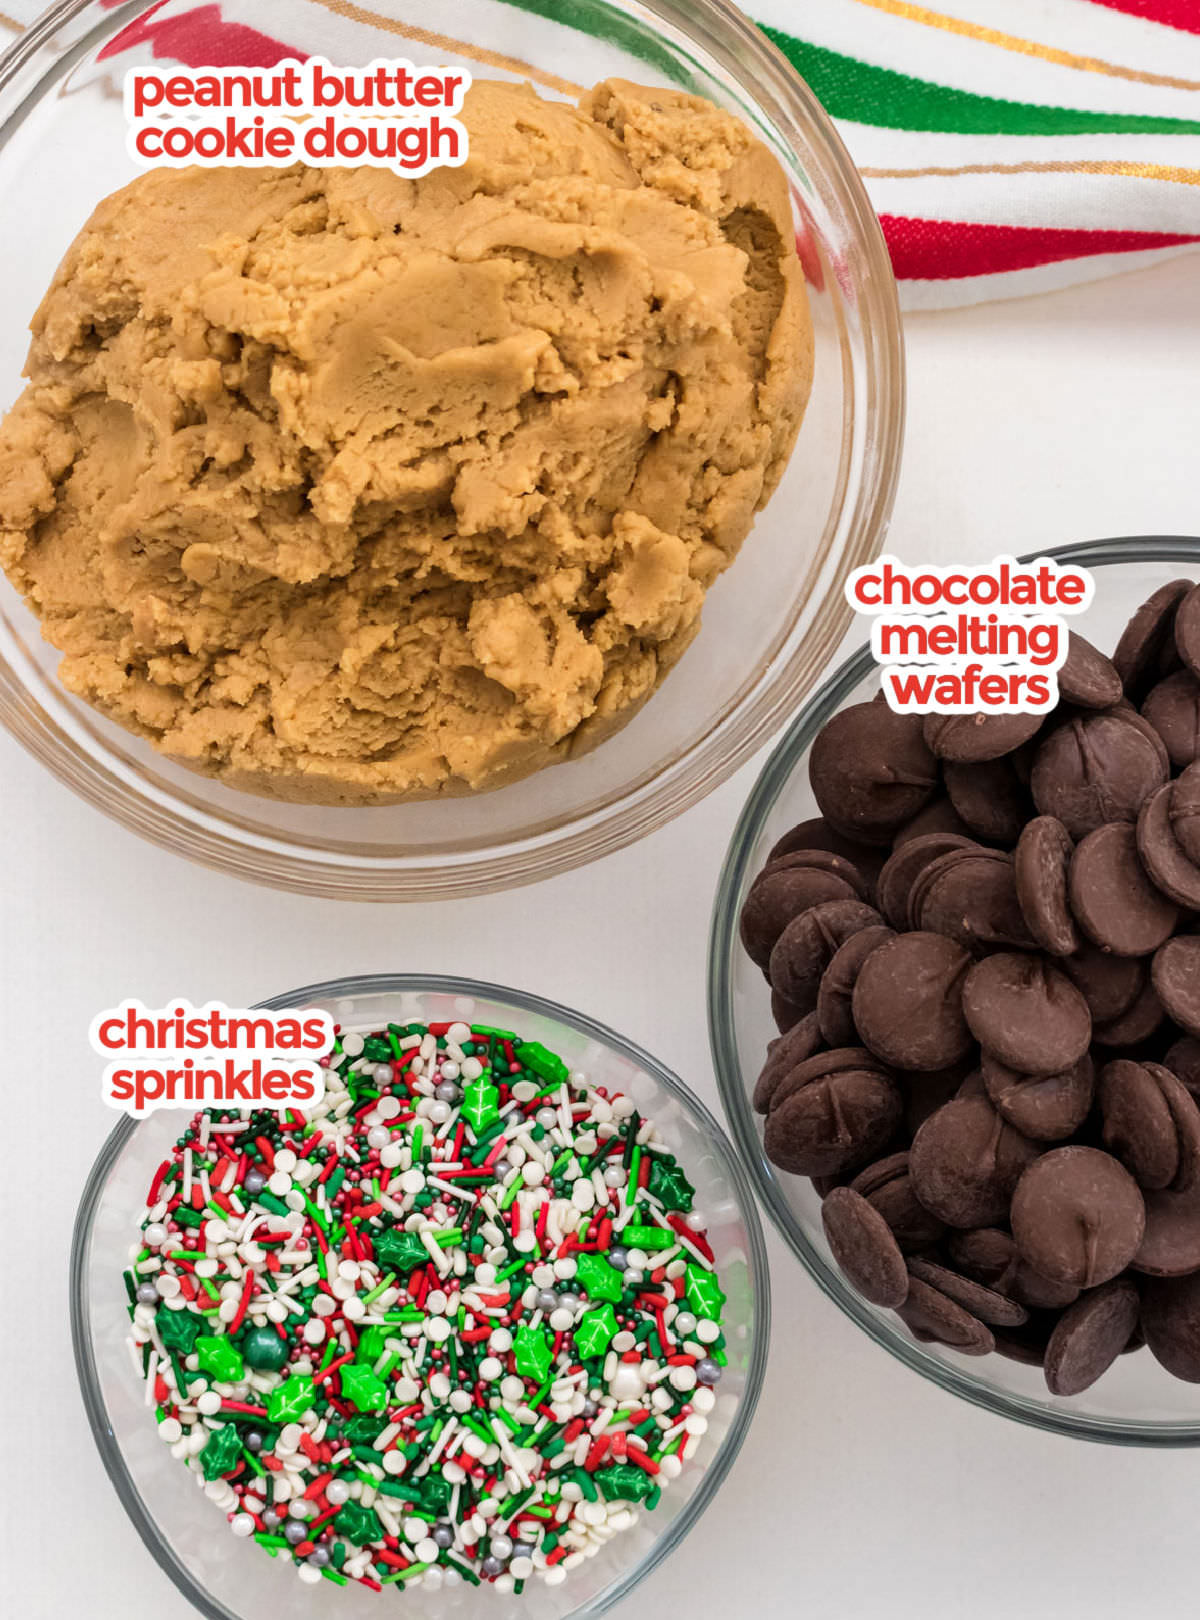 The ingredients you will need to create Chocolate Dipped Peanut Butter Cookies including peanut butter cookie dough, chocolate melting wafters and sprinkles.